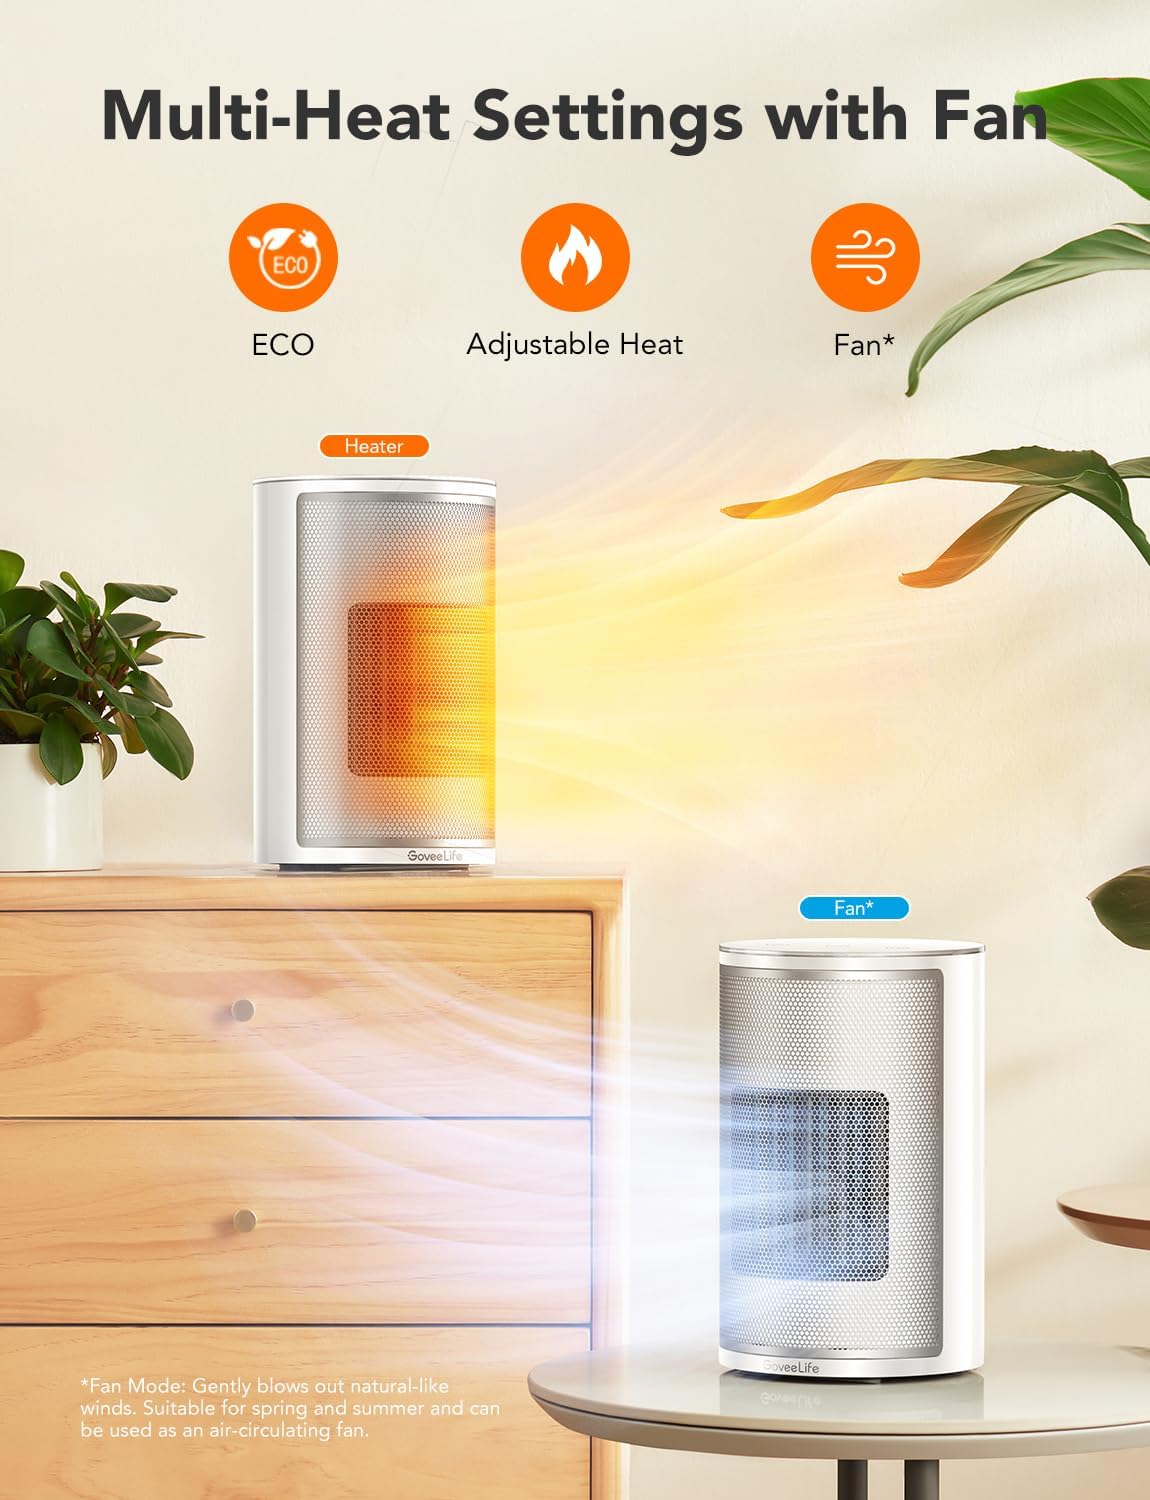 https://bigbigmart.com/wp-content/uploads/2023/11/GoveeLife-Smart-Space-Heater-for-Indoor-Use-1500W-Fast-Electric-Heater-with-Thermostat-Wi-Fi-App-Voice-Remote-Control-Small-Heater-Safety-for-Bedroom-Home-Indoors-Office-Desk-Portable-White8.jpg